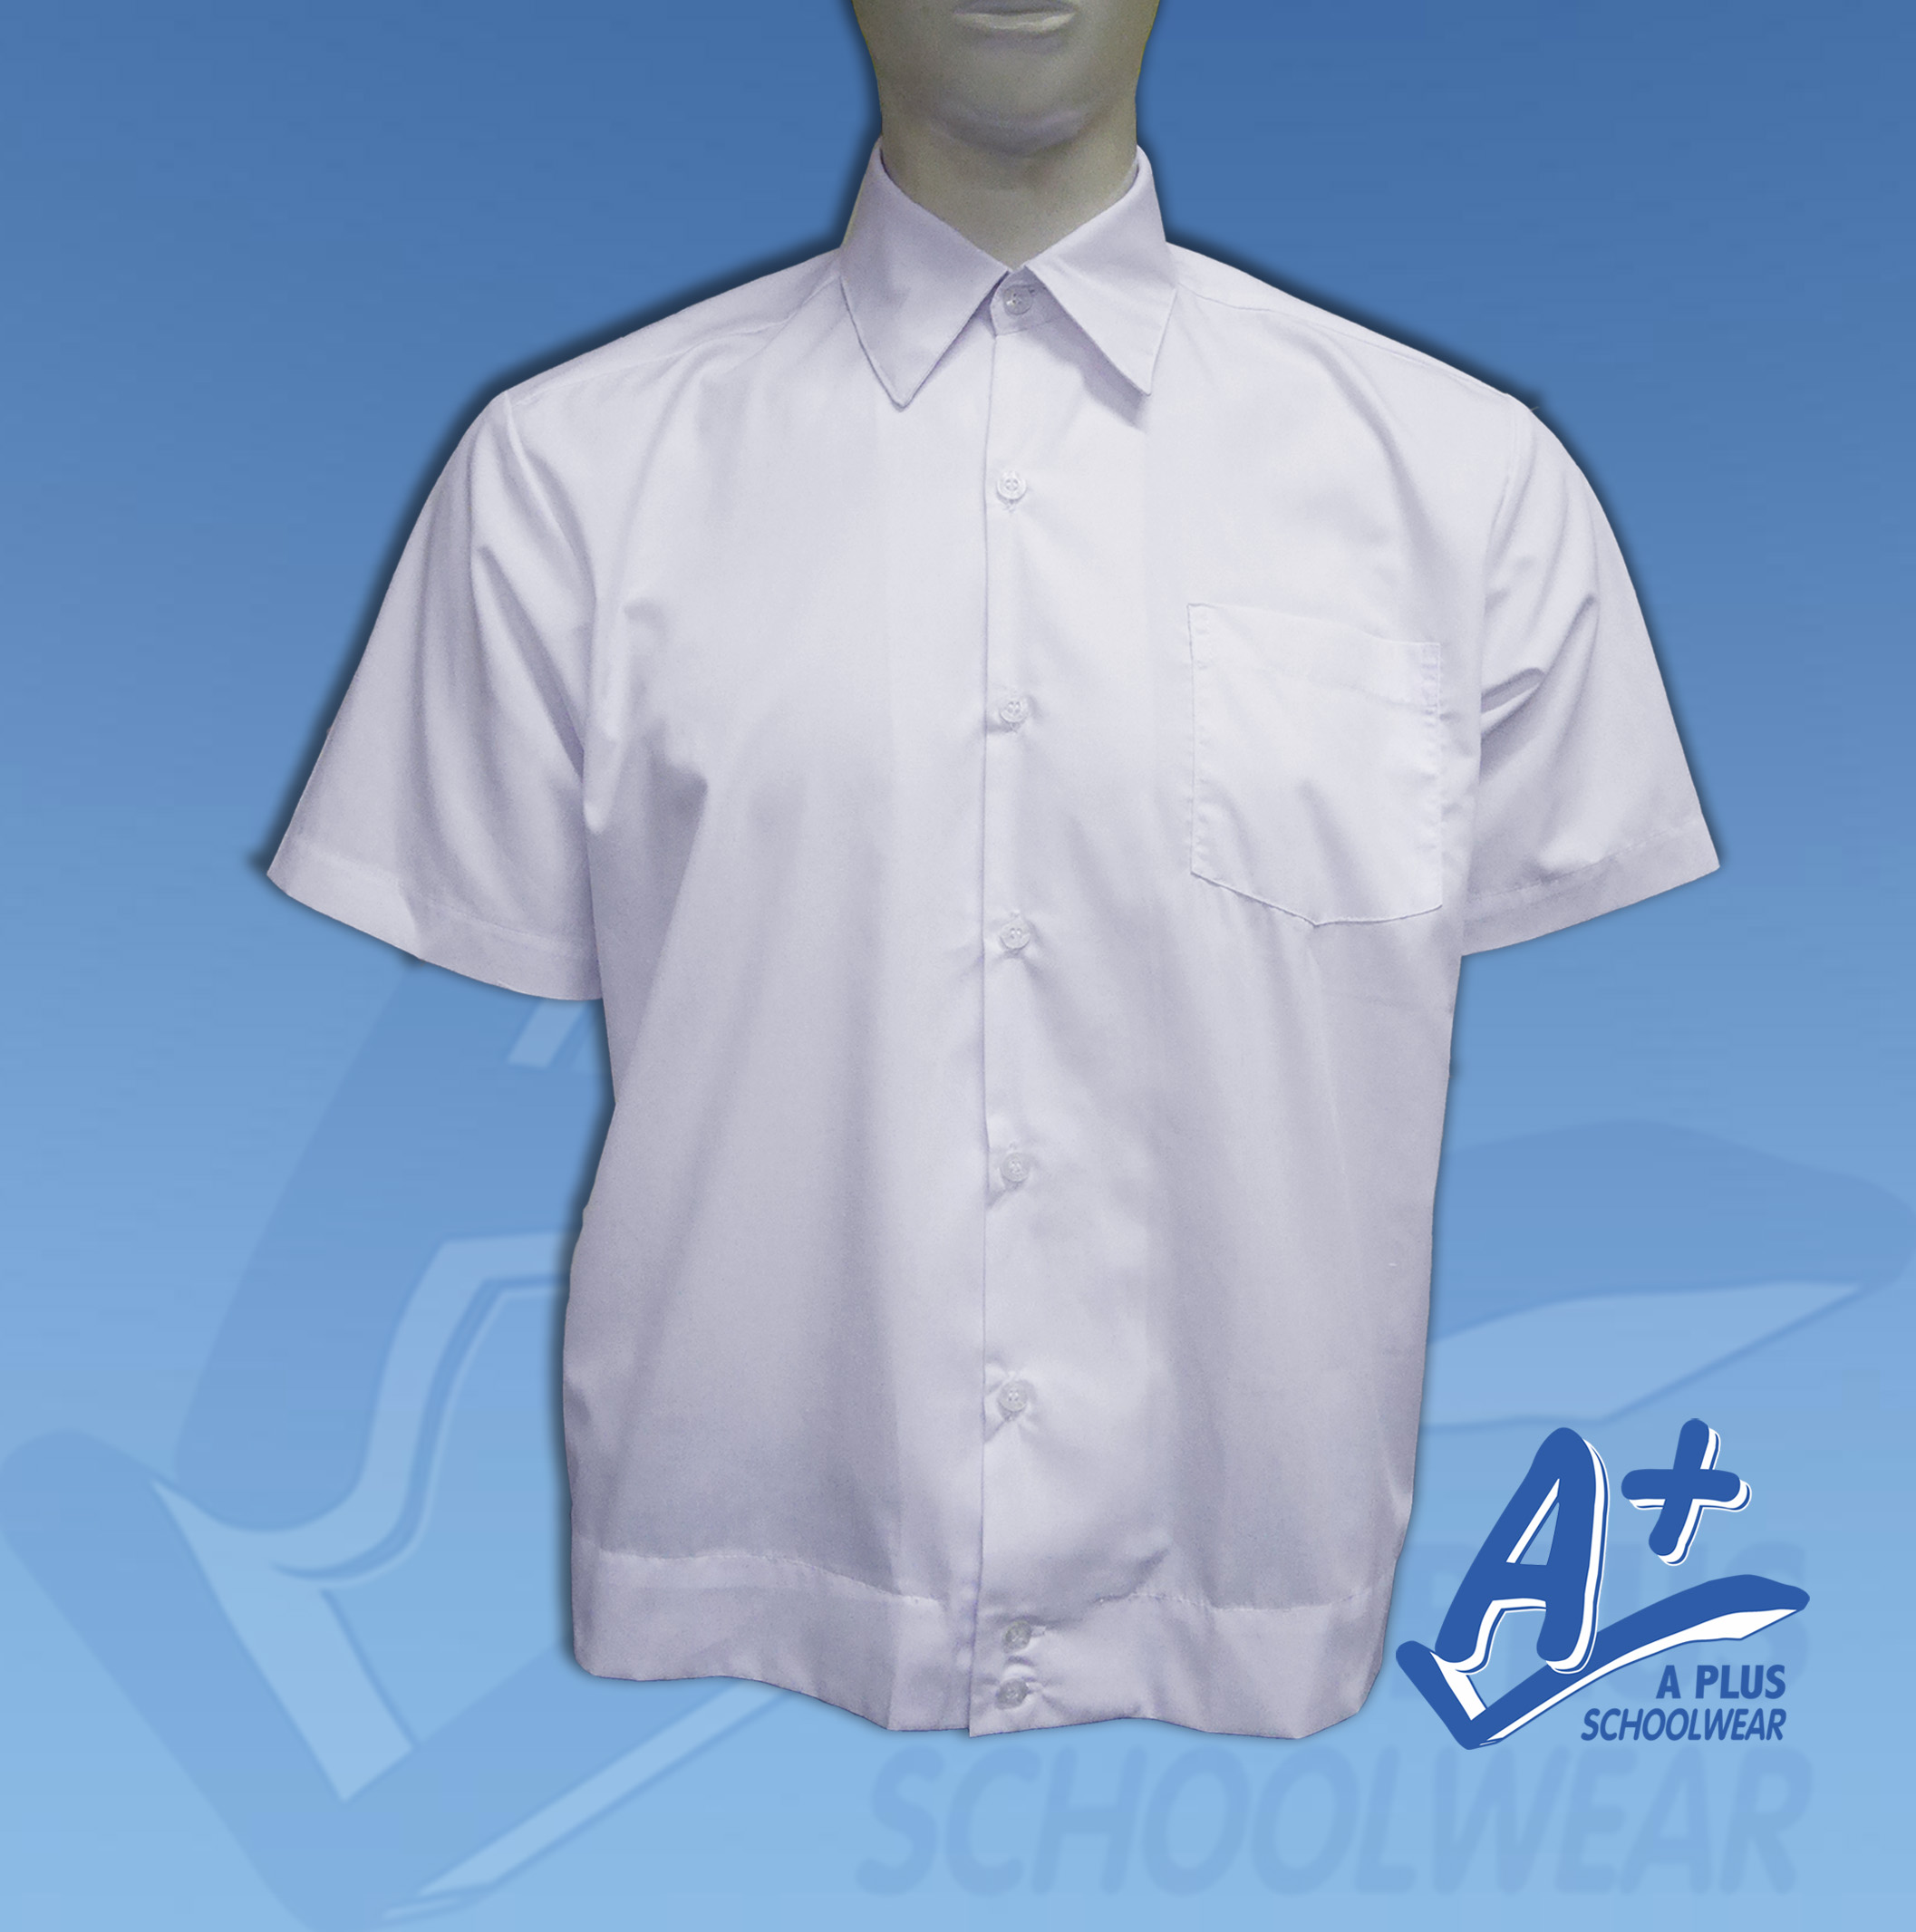 A+ Schoolwear Teens/Mens School Uniform White Polo with Jack (XS to 5XL ...